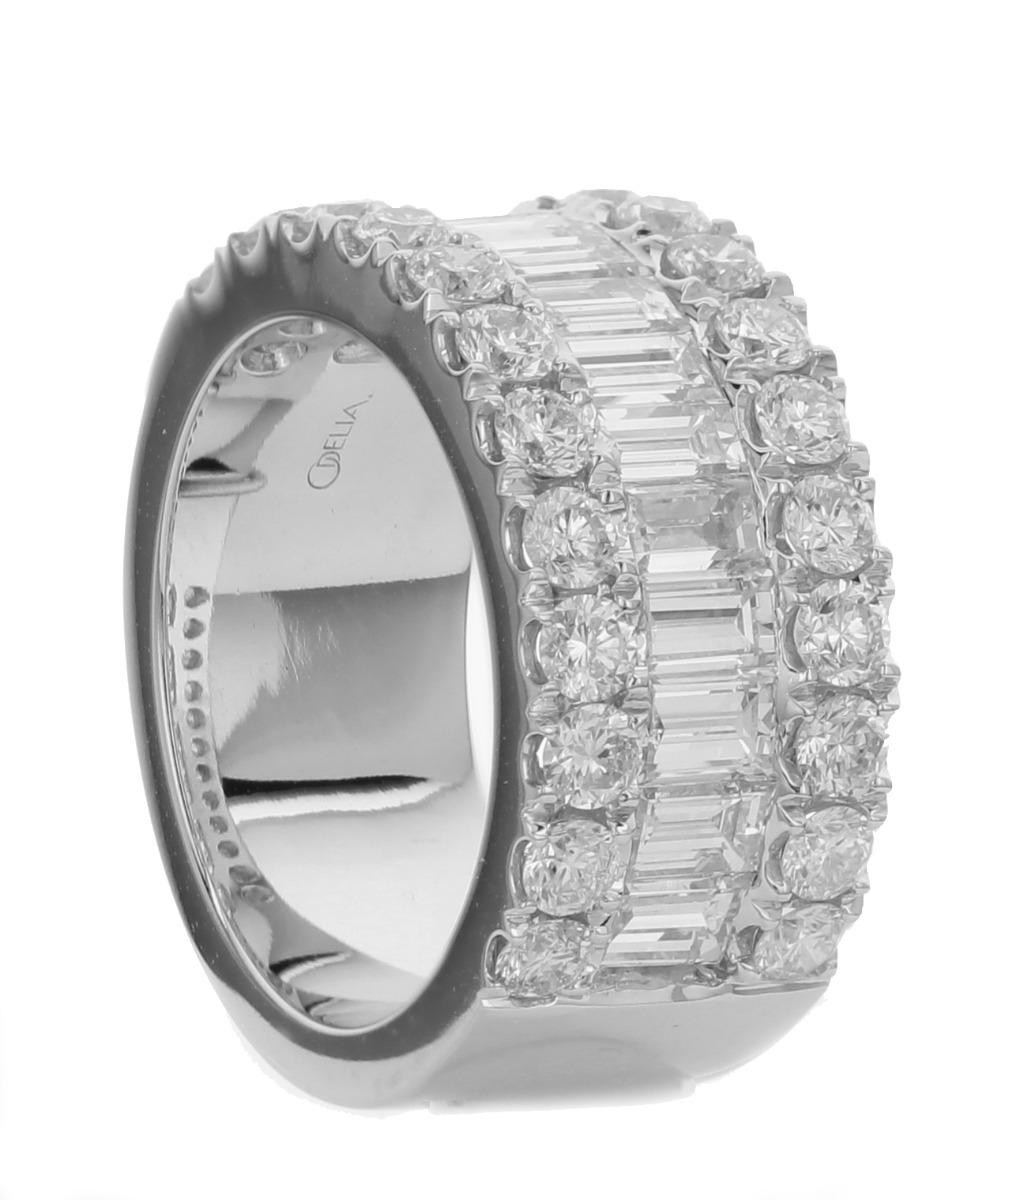 Metal: 18K WHITE GOLD 
Condition : New 
Total Weight : 9.00 GRAMS  
Gemstone : Diamond 
Total Carat Weight : 1.85 CT